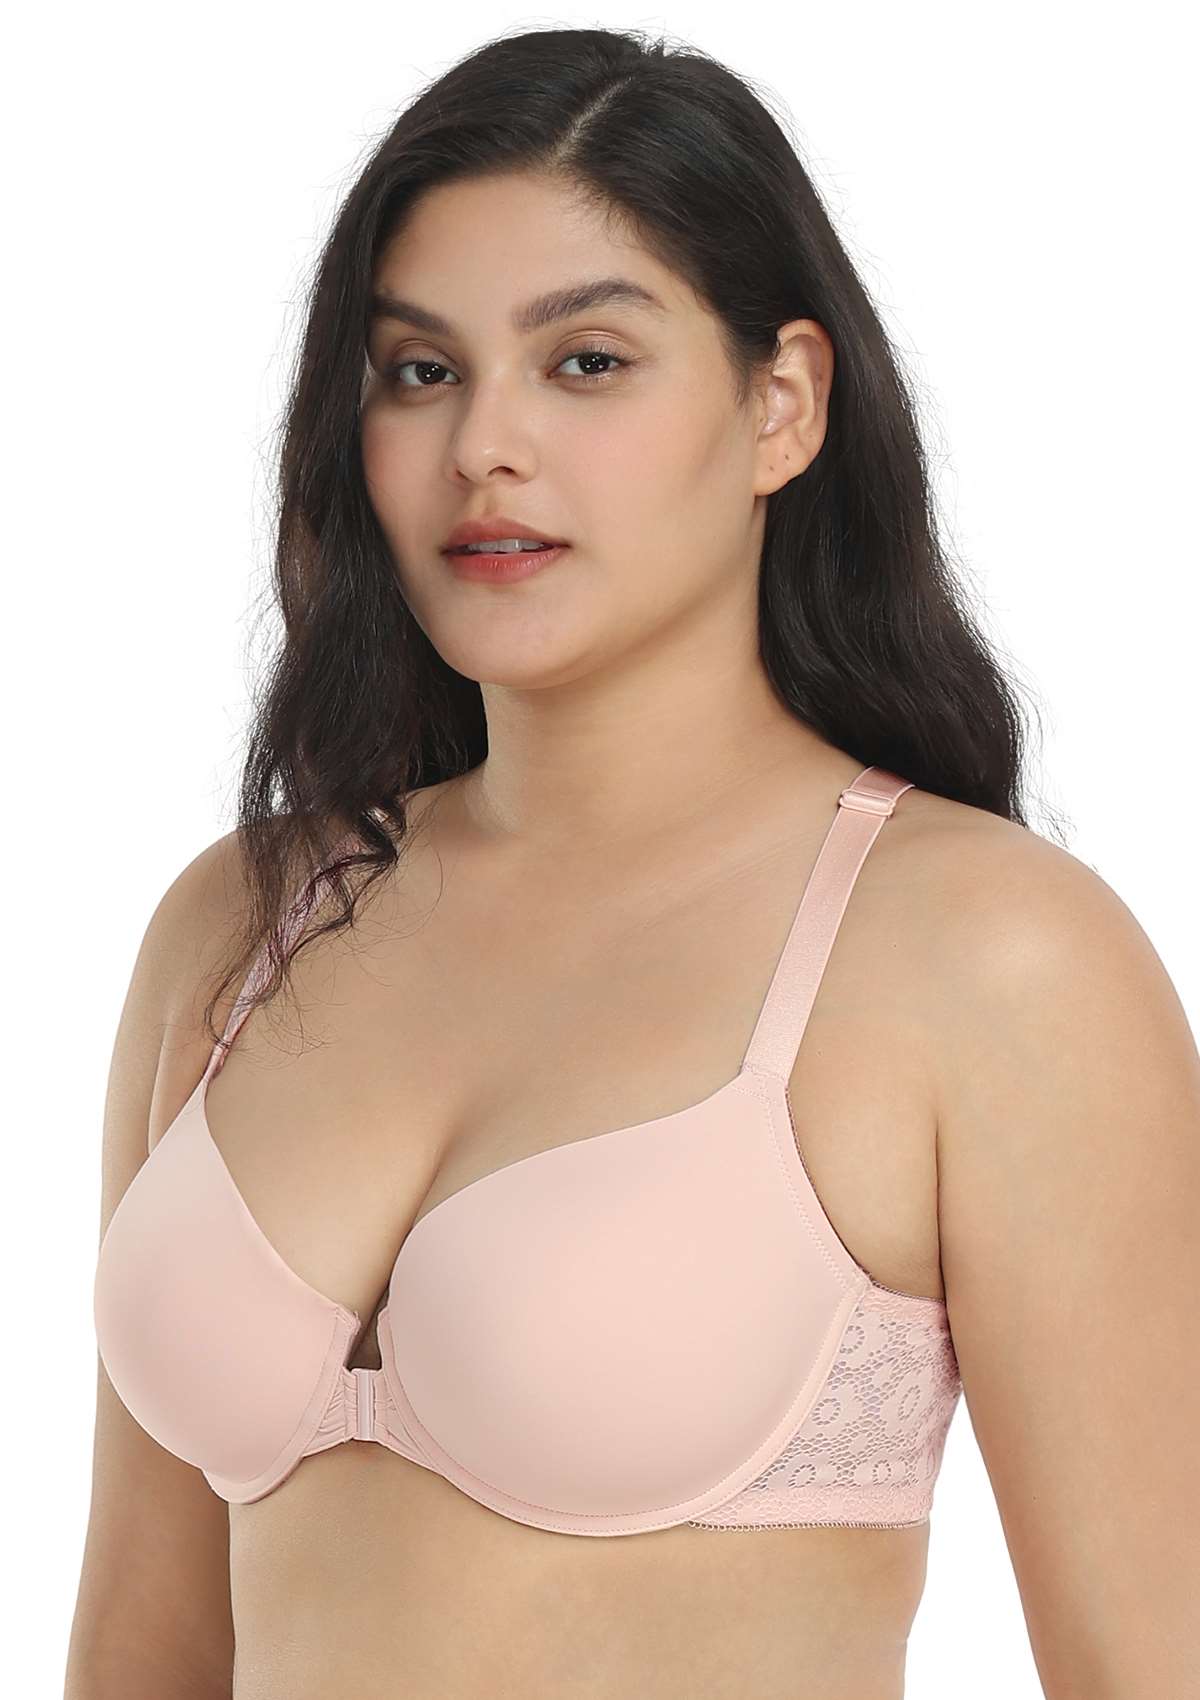 HSIA Serena Front-Close Lace Racerback Underwire Bra For Back Support - Pink / 34 / C